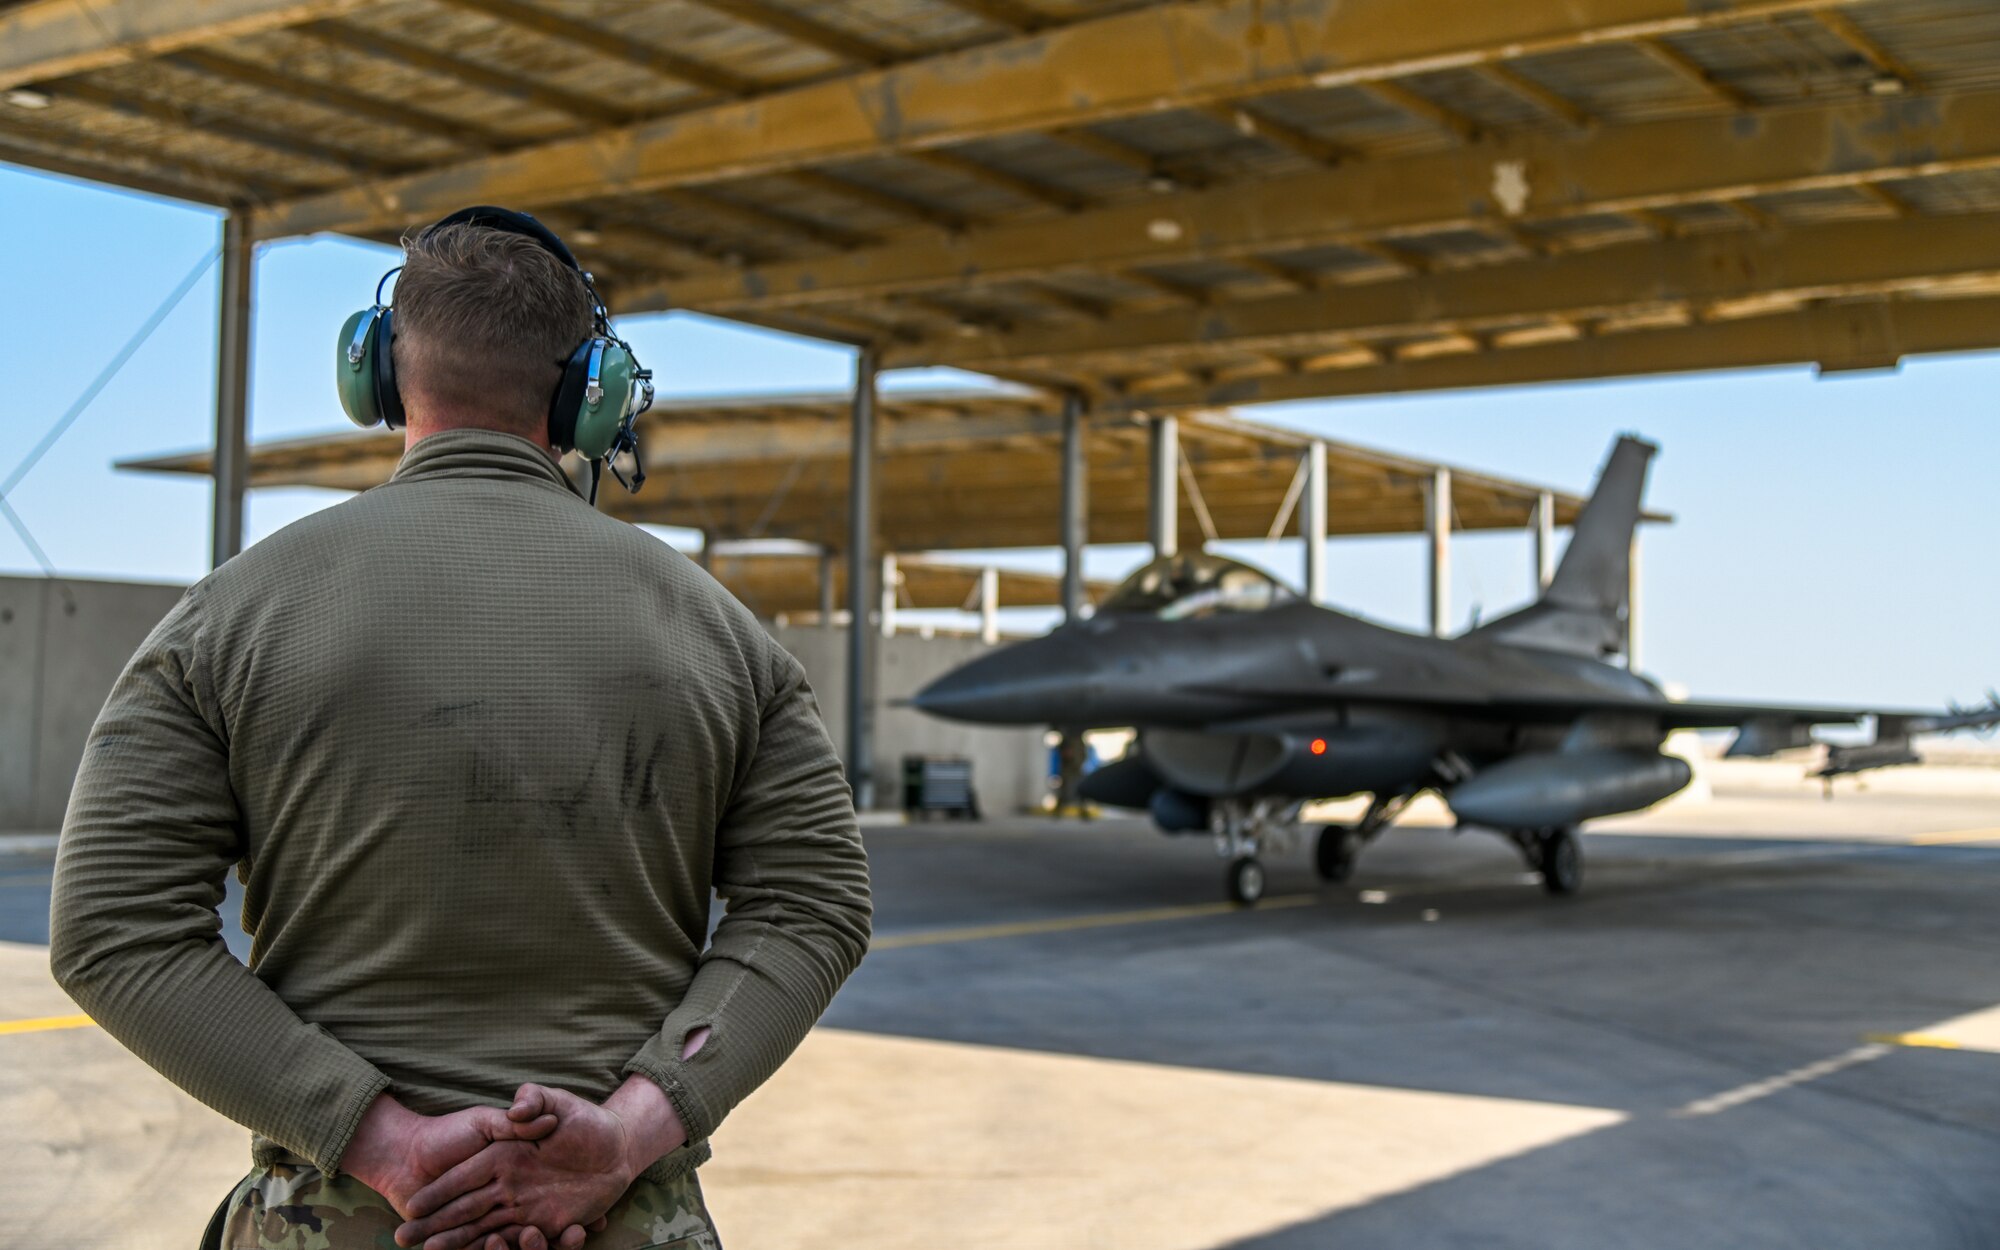 U.S. Air Force Airman 1st Class Trace Cannon, 378th Expeditionary Maintenance Squadron crew chief, conducts pre-flight checks for an F-16 Fighting Falcon at King Abdulaziz Air Base, Kingdom of Saudi Arabia, Feb. 13, 2022. Training with partner nations strengthens military-to-military relationships, improves interoperability and promotes regional stability. (U.S. Air Force photo by Staff Sgt. Christina A. Graves)